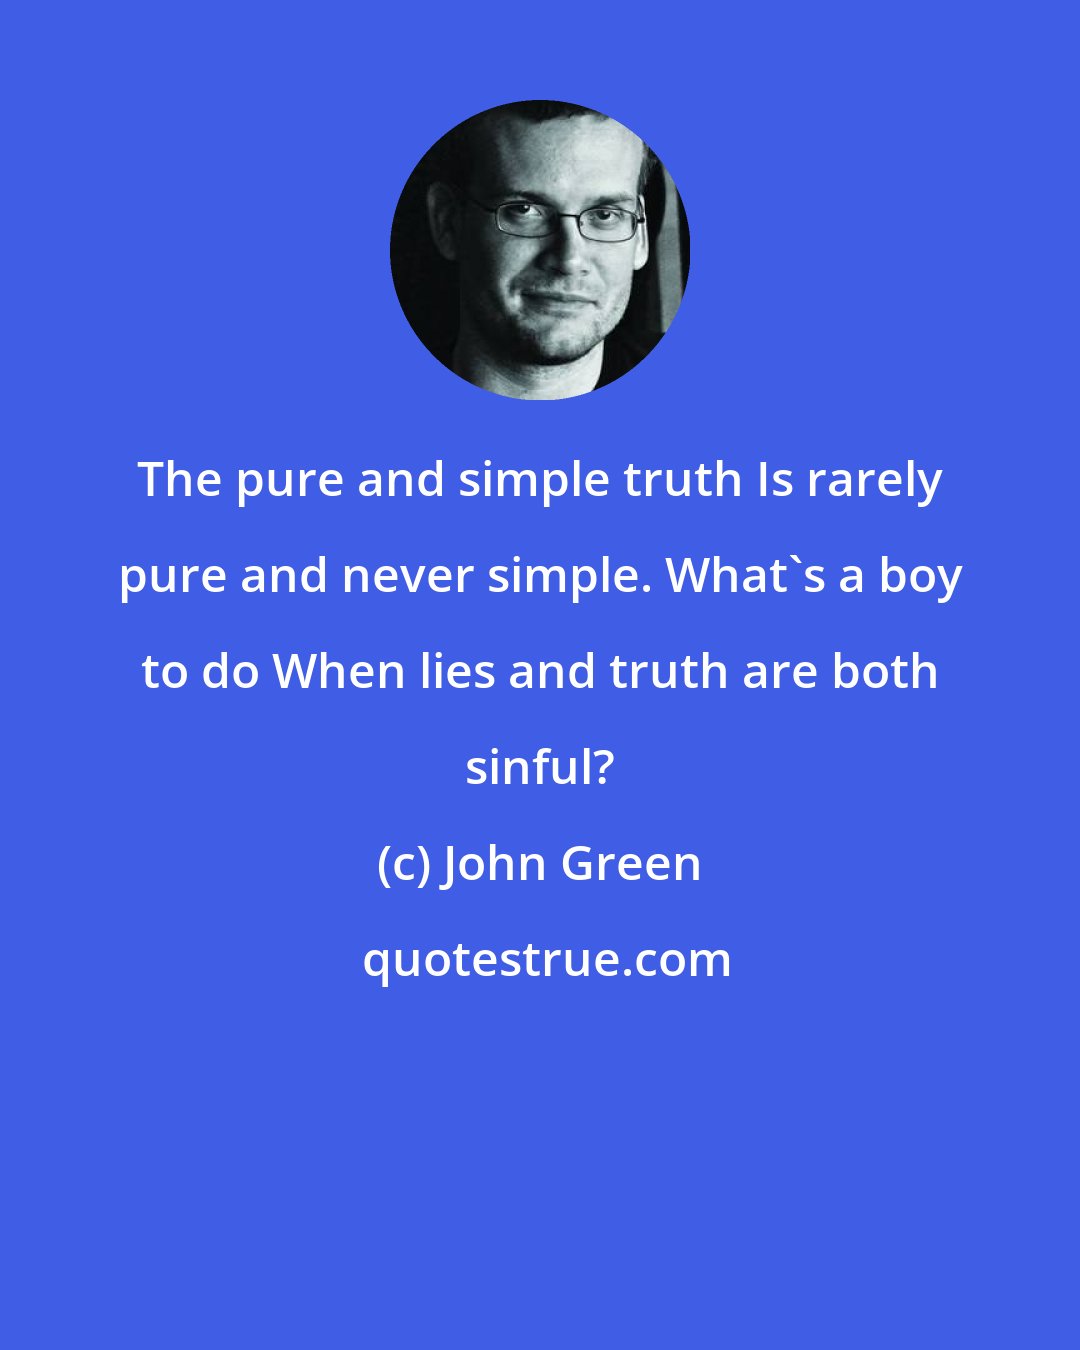 John Green: The pure and simple truth Is rarely pure and never simple. What's a boy to do When lies and truth are both sinful?